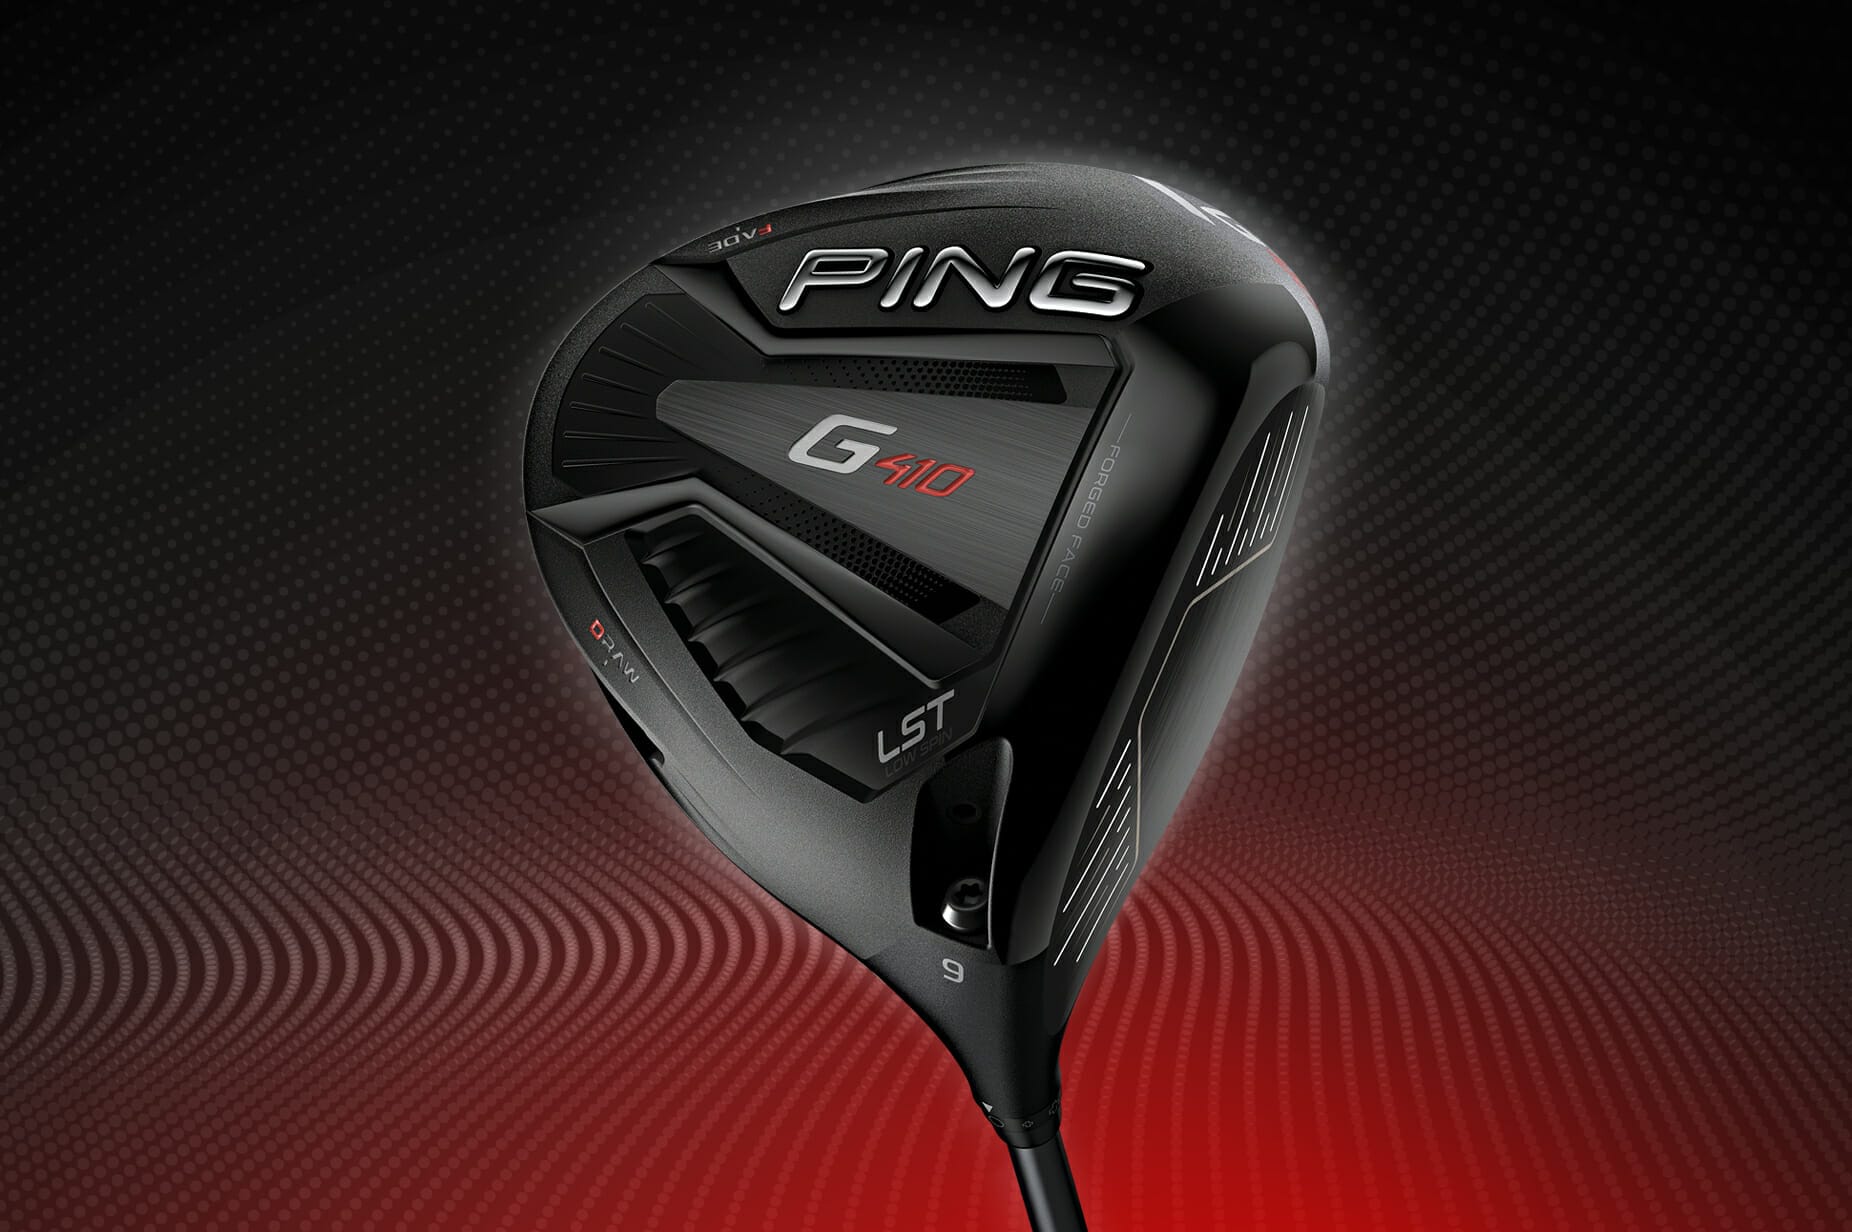 PING takes aim at all golfers with new G410 LST Driver - Irish Golfer